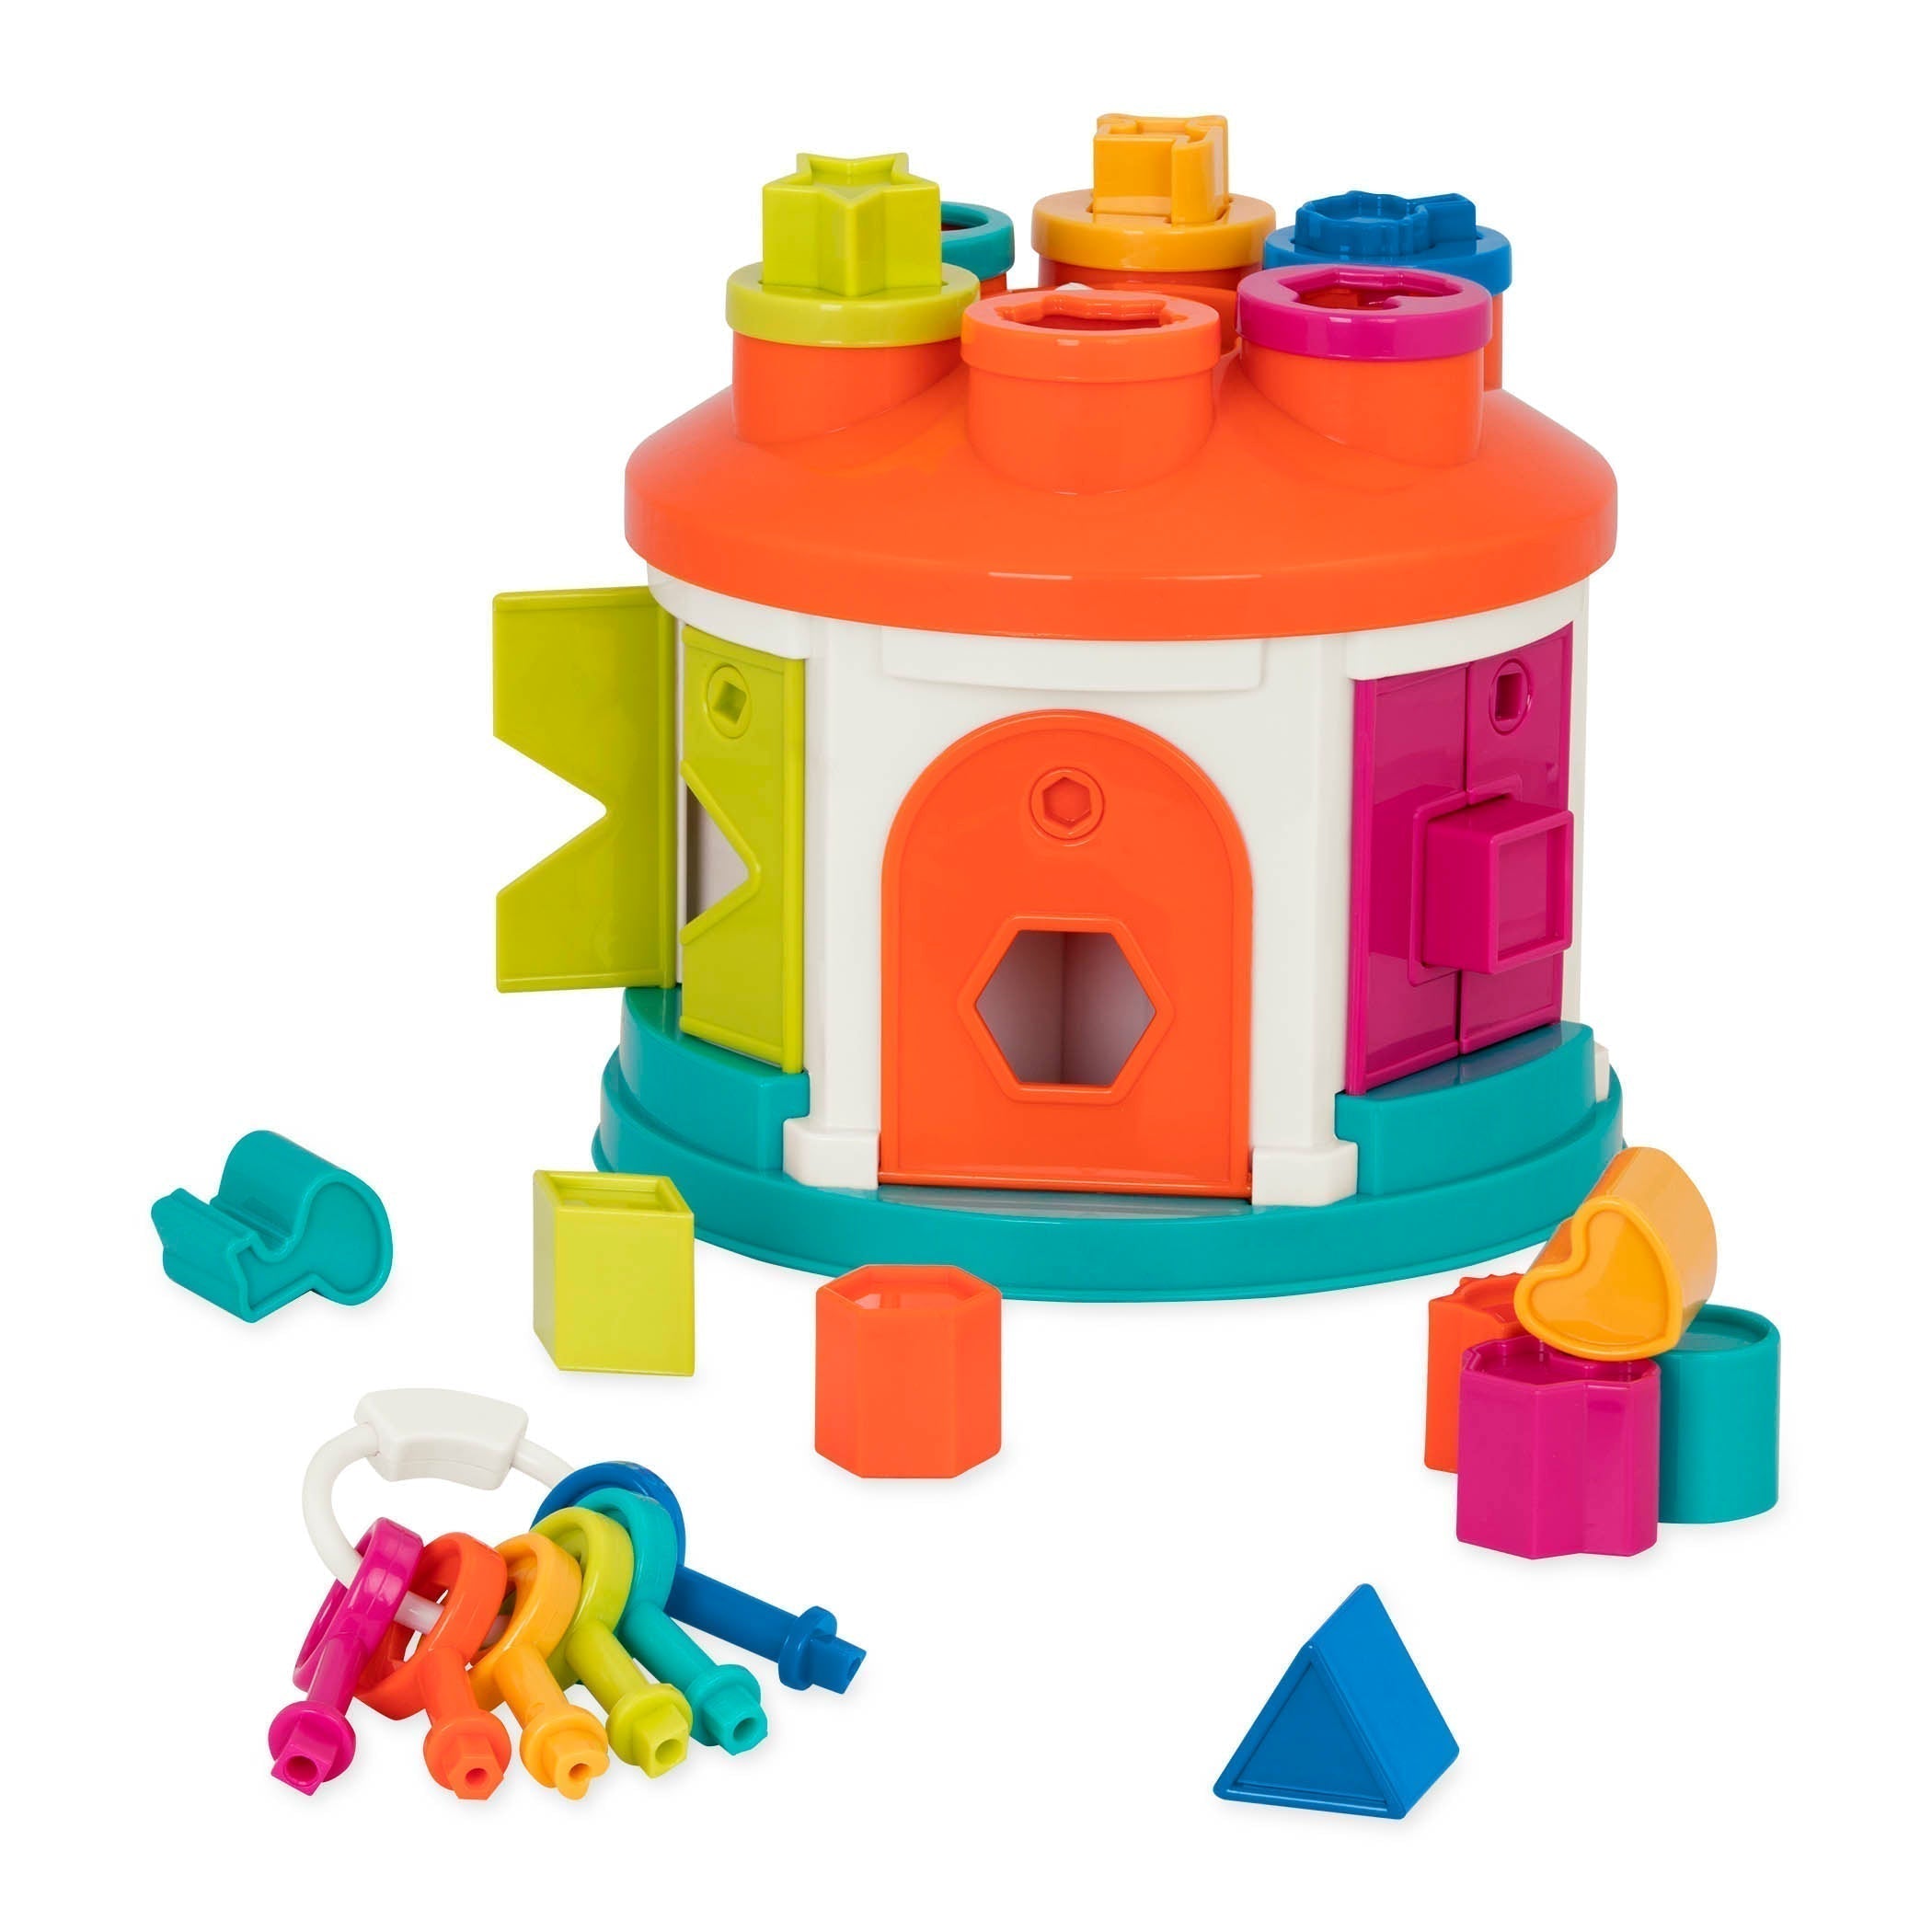 Battat Shape Sorter House, The Shape Sorter House from Battat is a take-along shape sorting playset that comes with 12 different shapes, a set of 6 keys and many shape and color sorting features. Shapes are easy to grab and fit and slide perfectly through a hole of the same shape somewhere around the house. Will it be on top or through a little window on the side? This is a case for your toddler to solve. Match the different shapes and see where they fit. Grab the keys, find the right one and unlock the doo